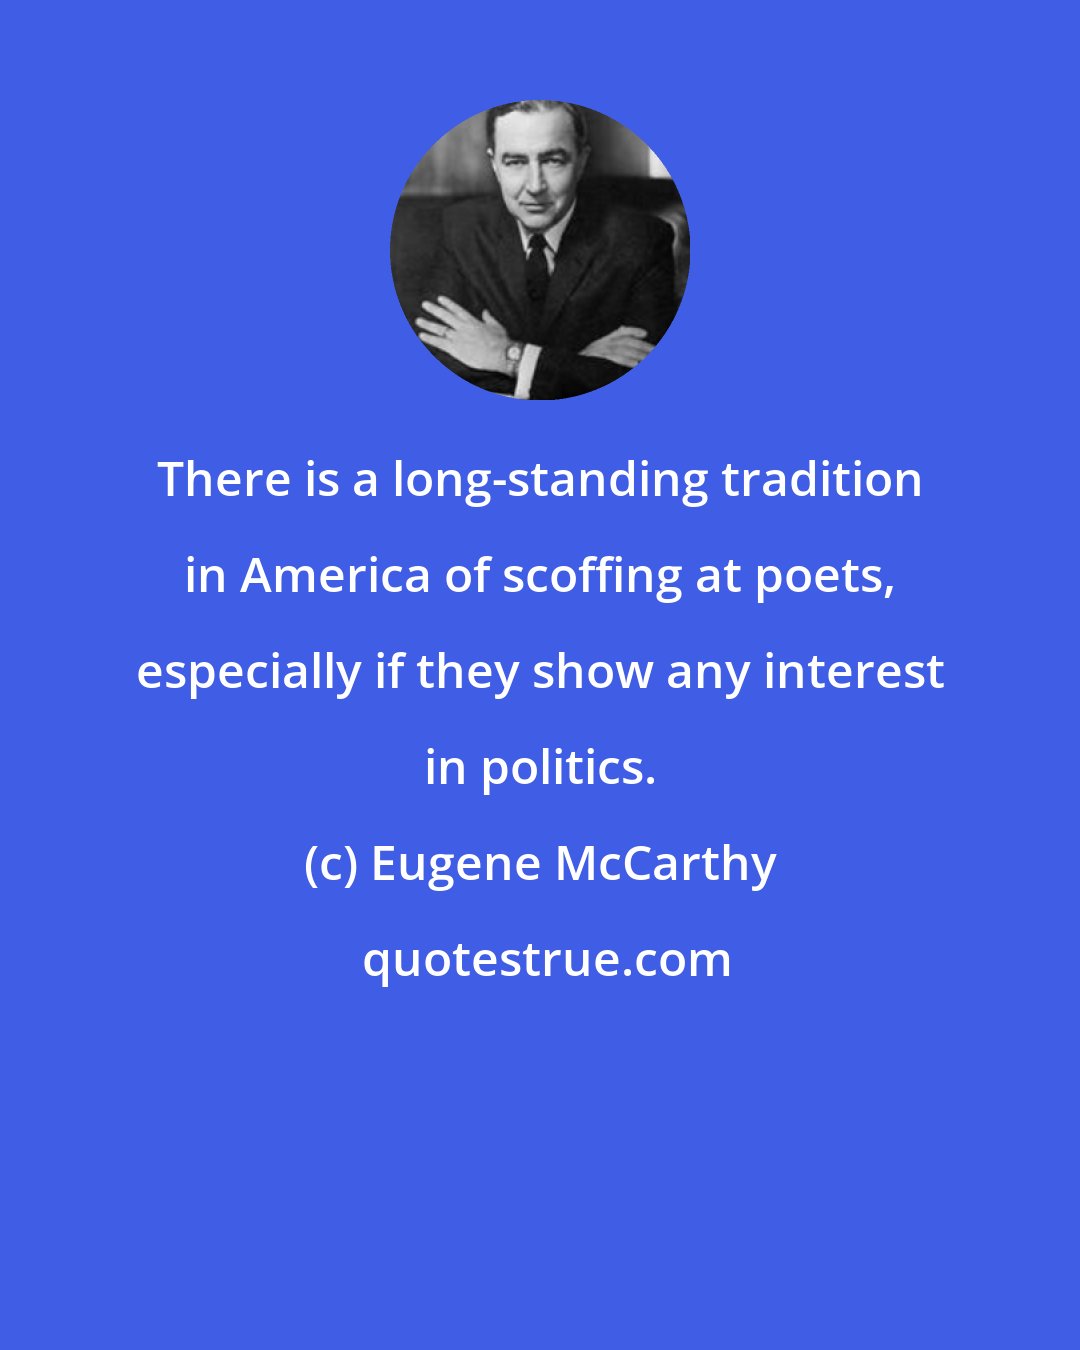 Eugene McCarthy: There is a long-standing tradition in America of scoffing at poets, especially if they show any interest in politics.